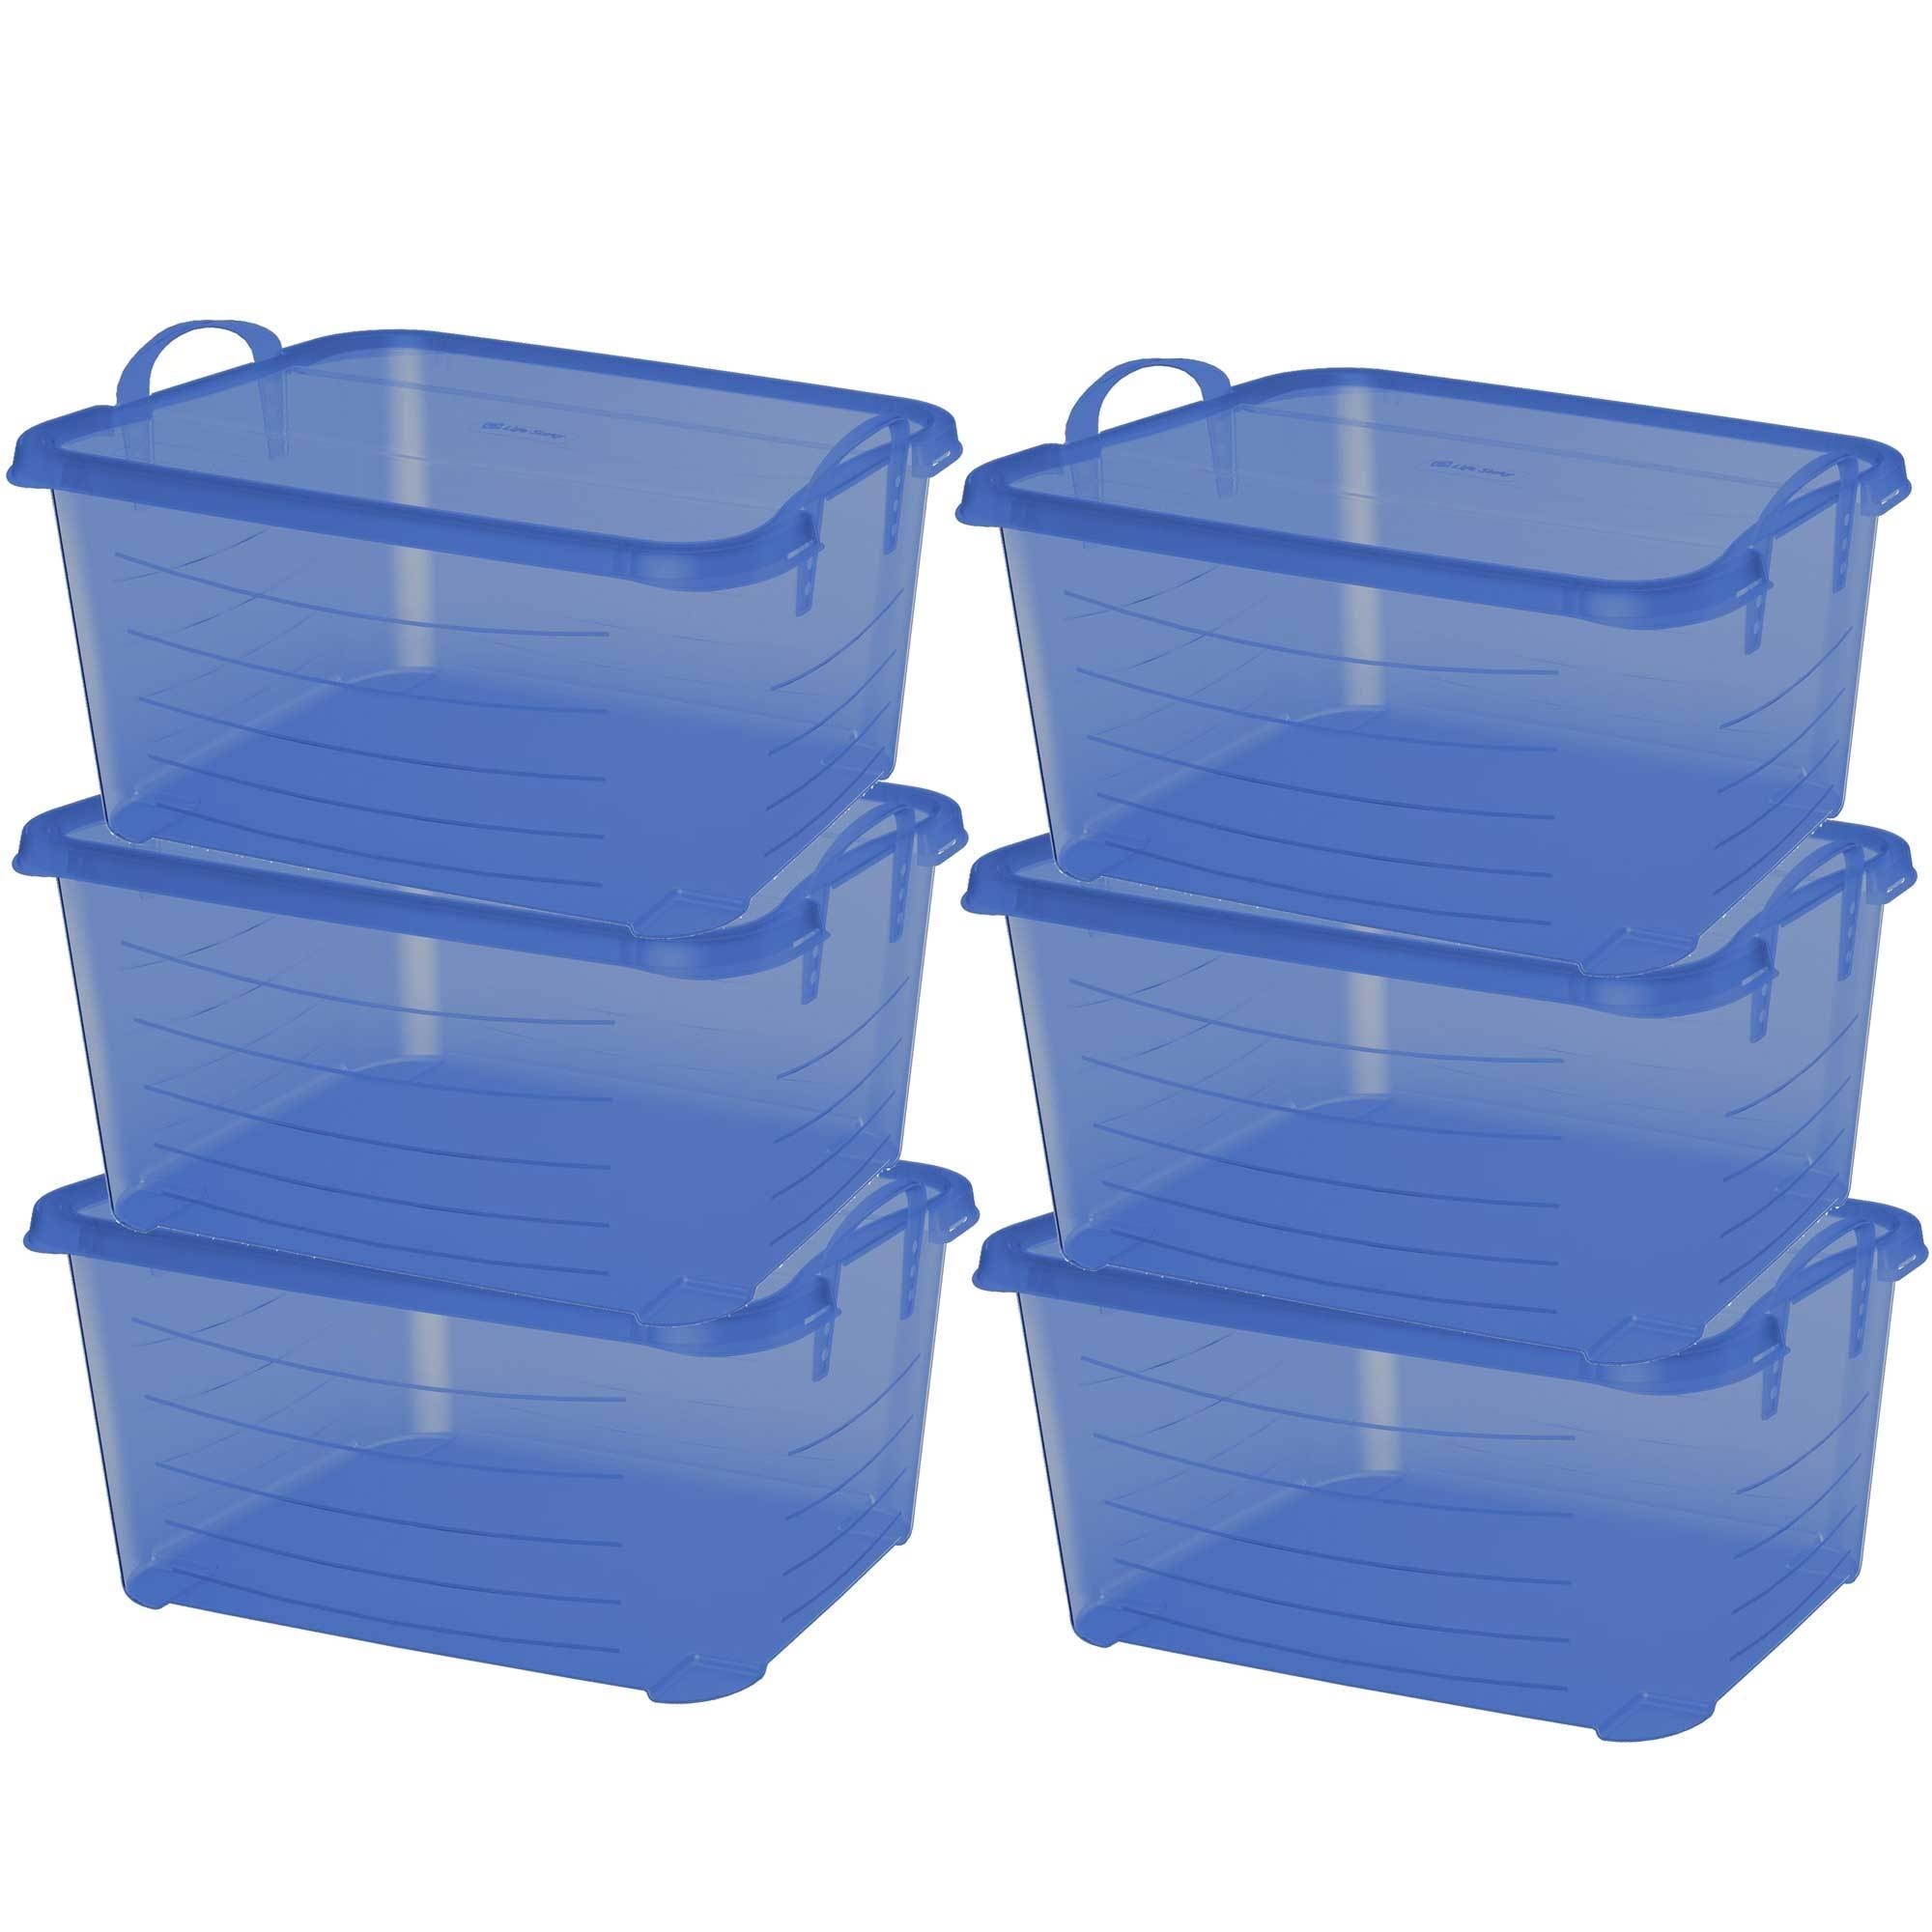 https://ak1.ostkcdn.com/images/products/is/images/direct/1bde5e208864b5f530ae4a54ef82dcd0862b8138/Life-Story-Blue-55-Quart-Stackable-Closet-Storage-Box-Containers-Totes-%286-Pack%29.jpg